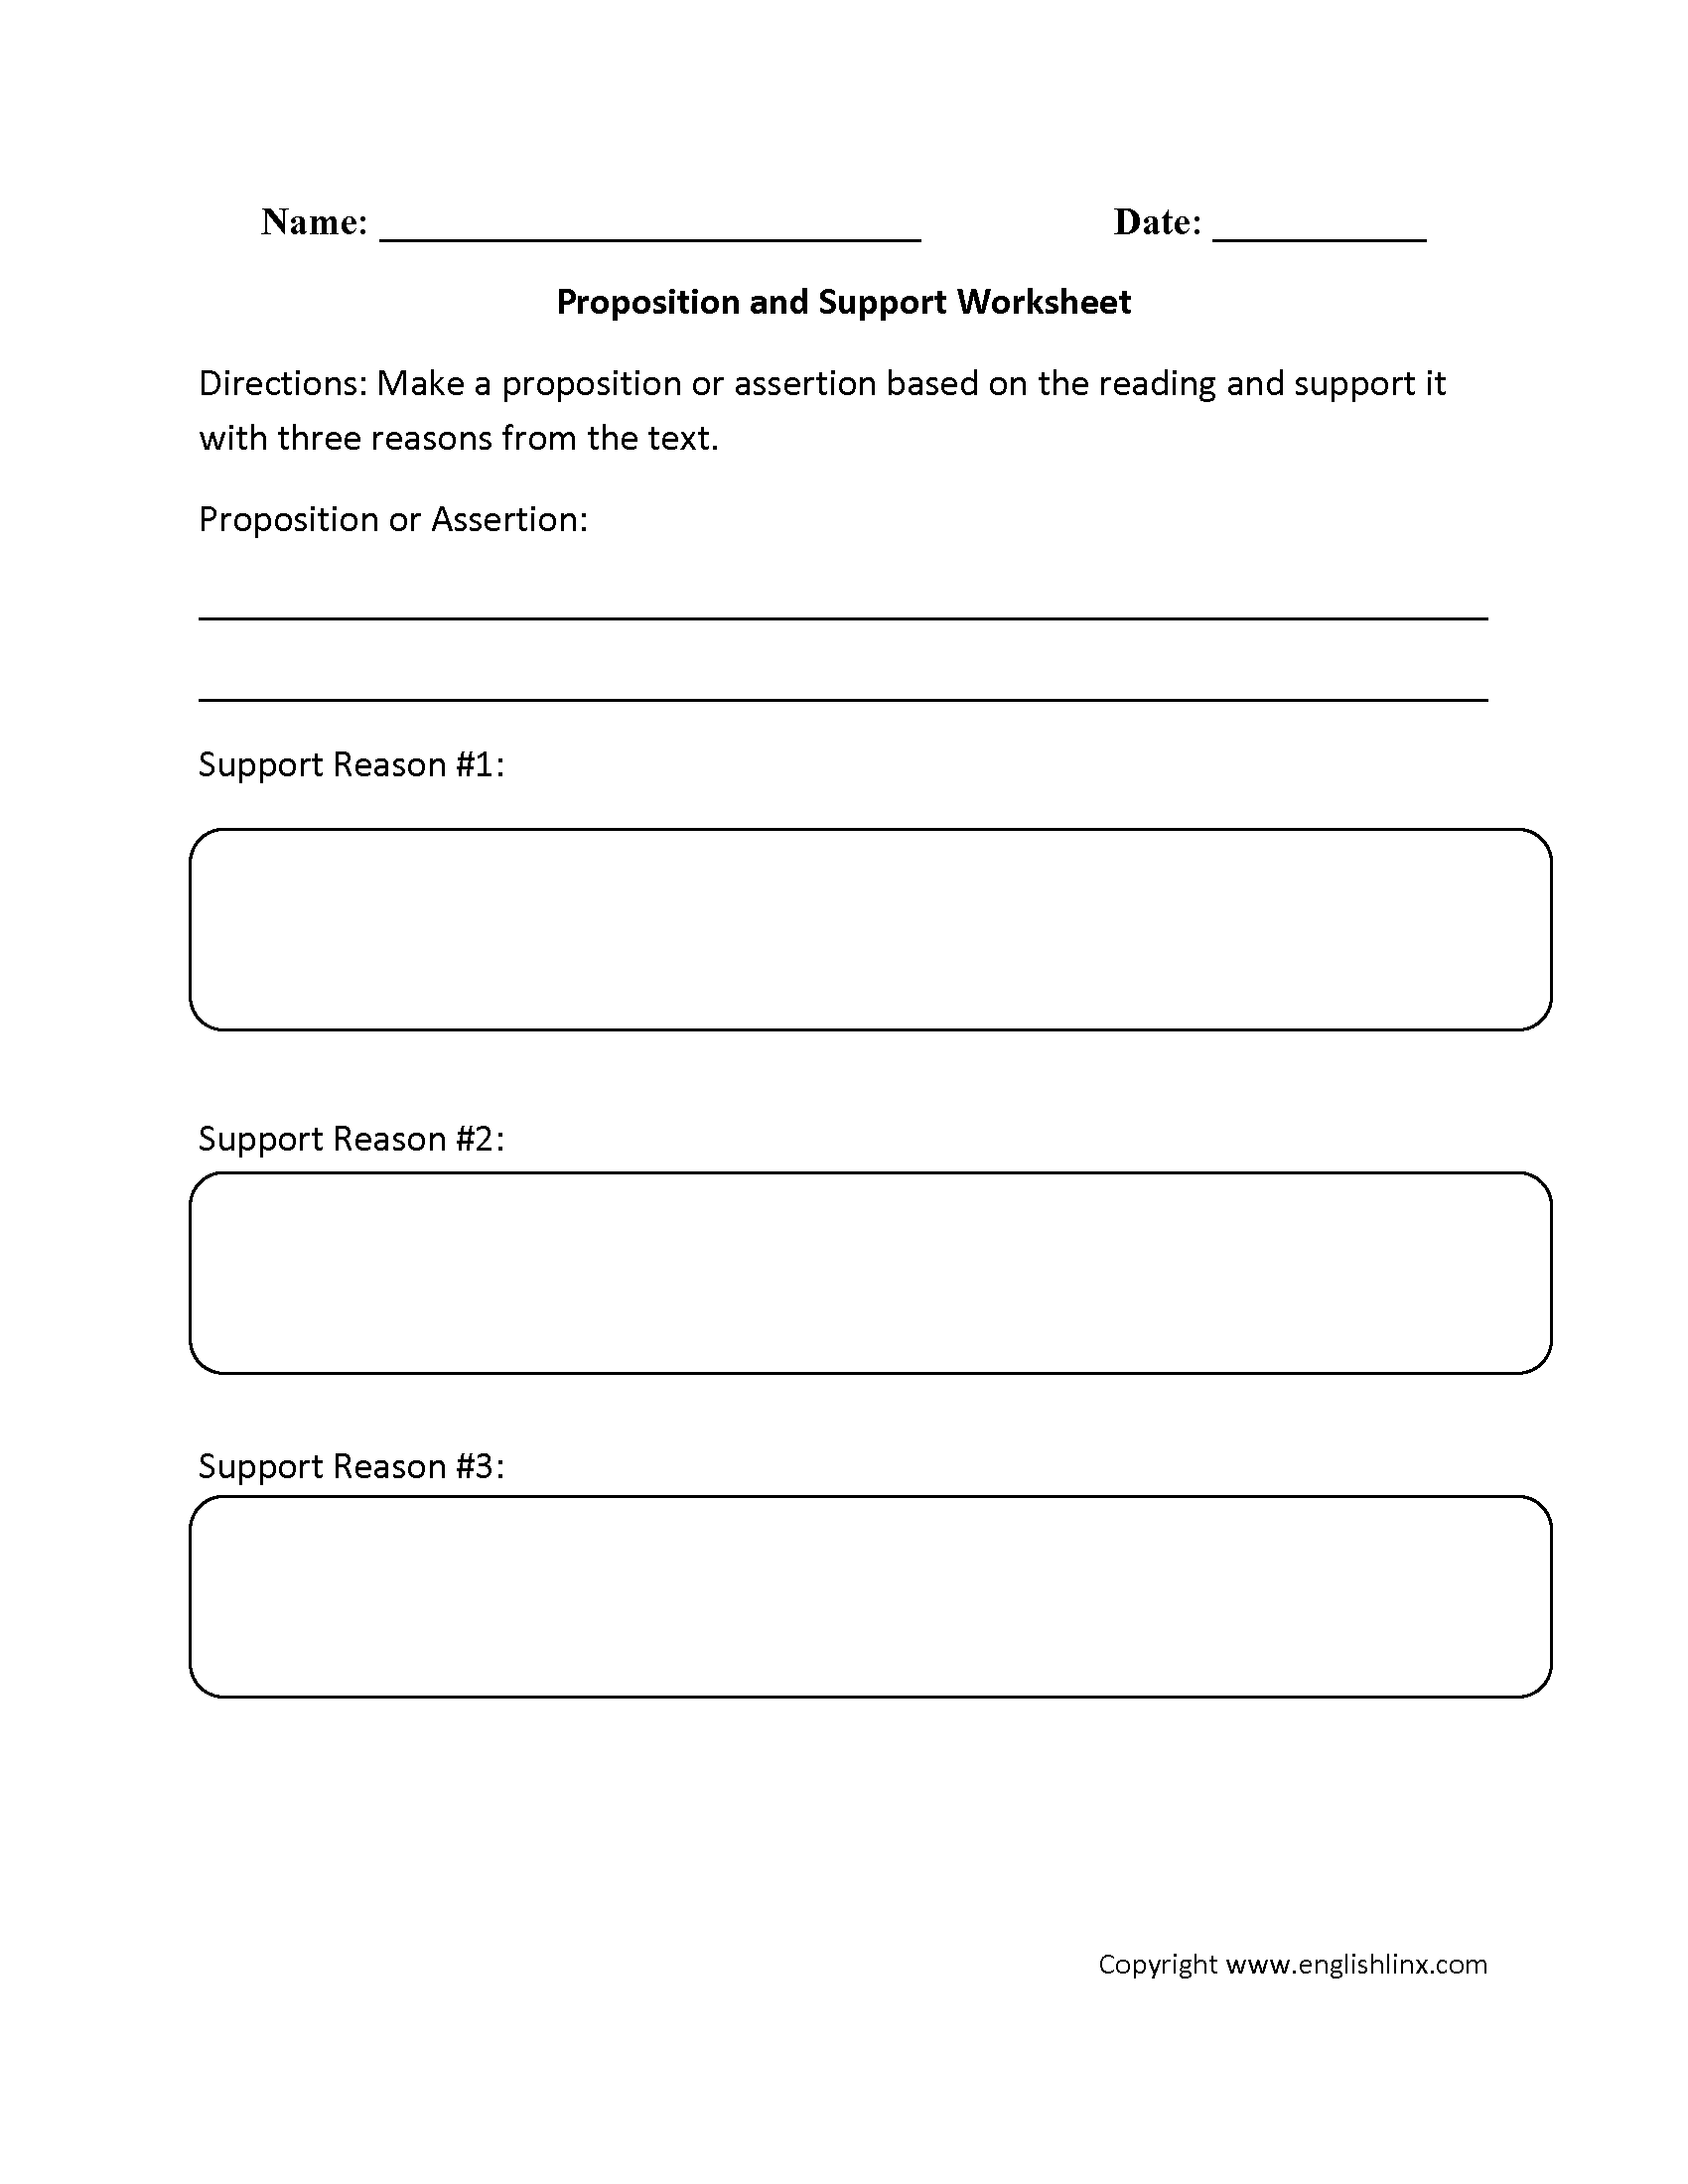 Proposition and Support Reading Comprehension Worksheet